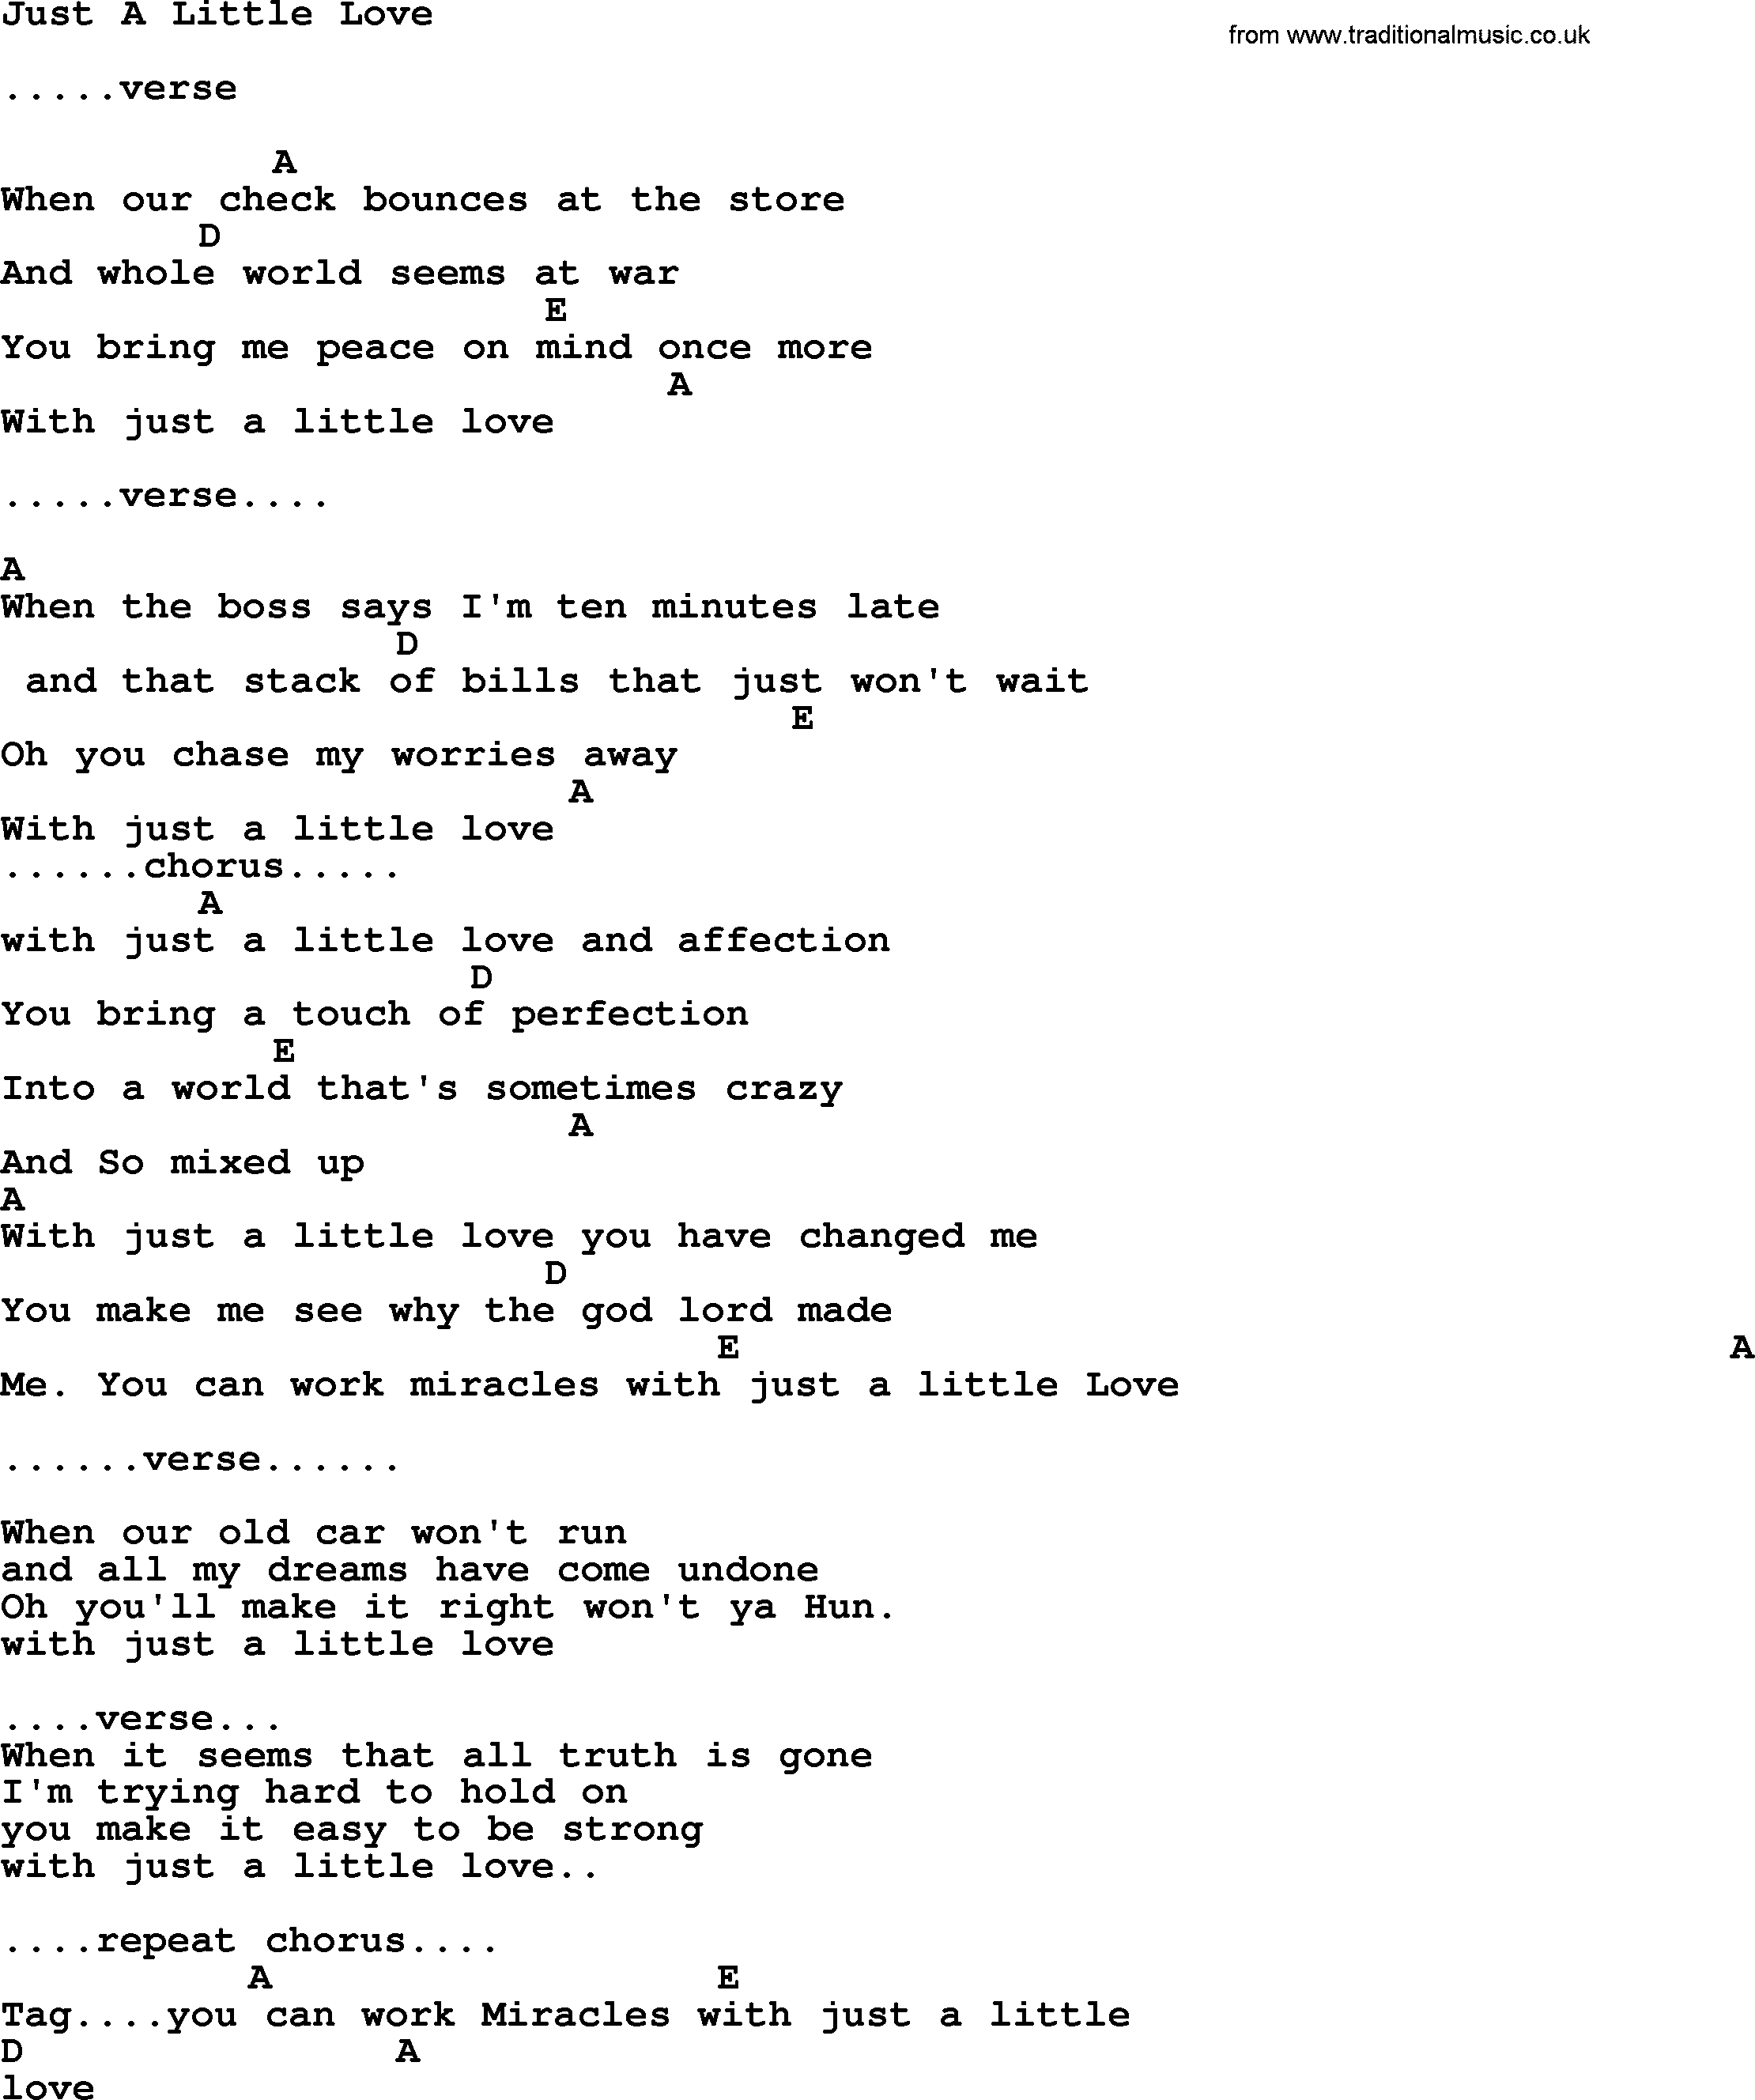 Reba McEntire song: Just A Little Love, lyrics and chords